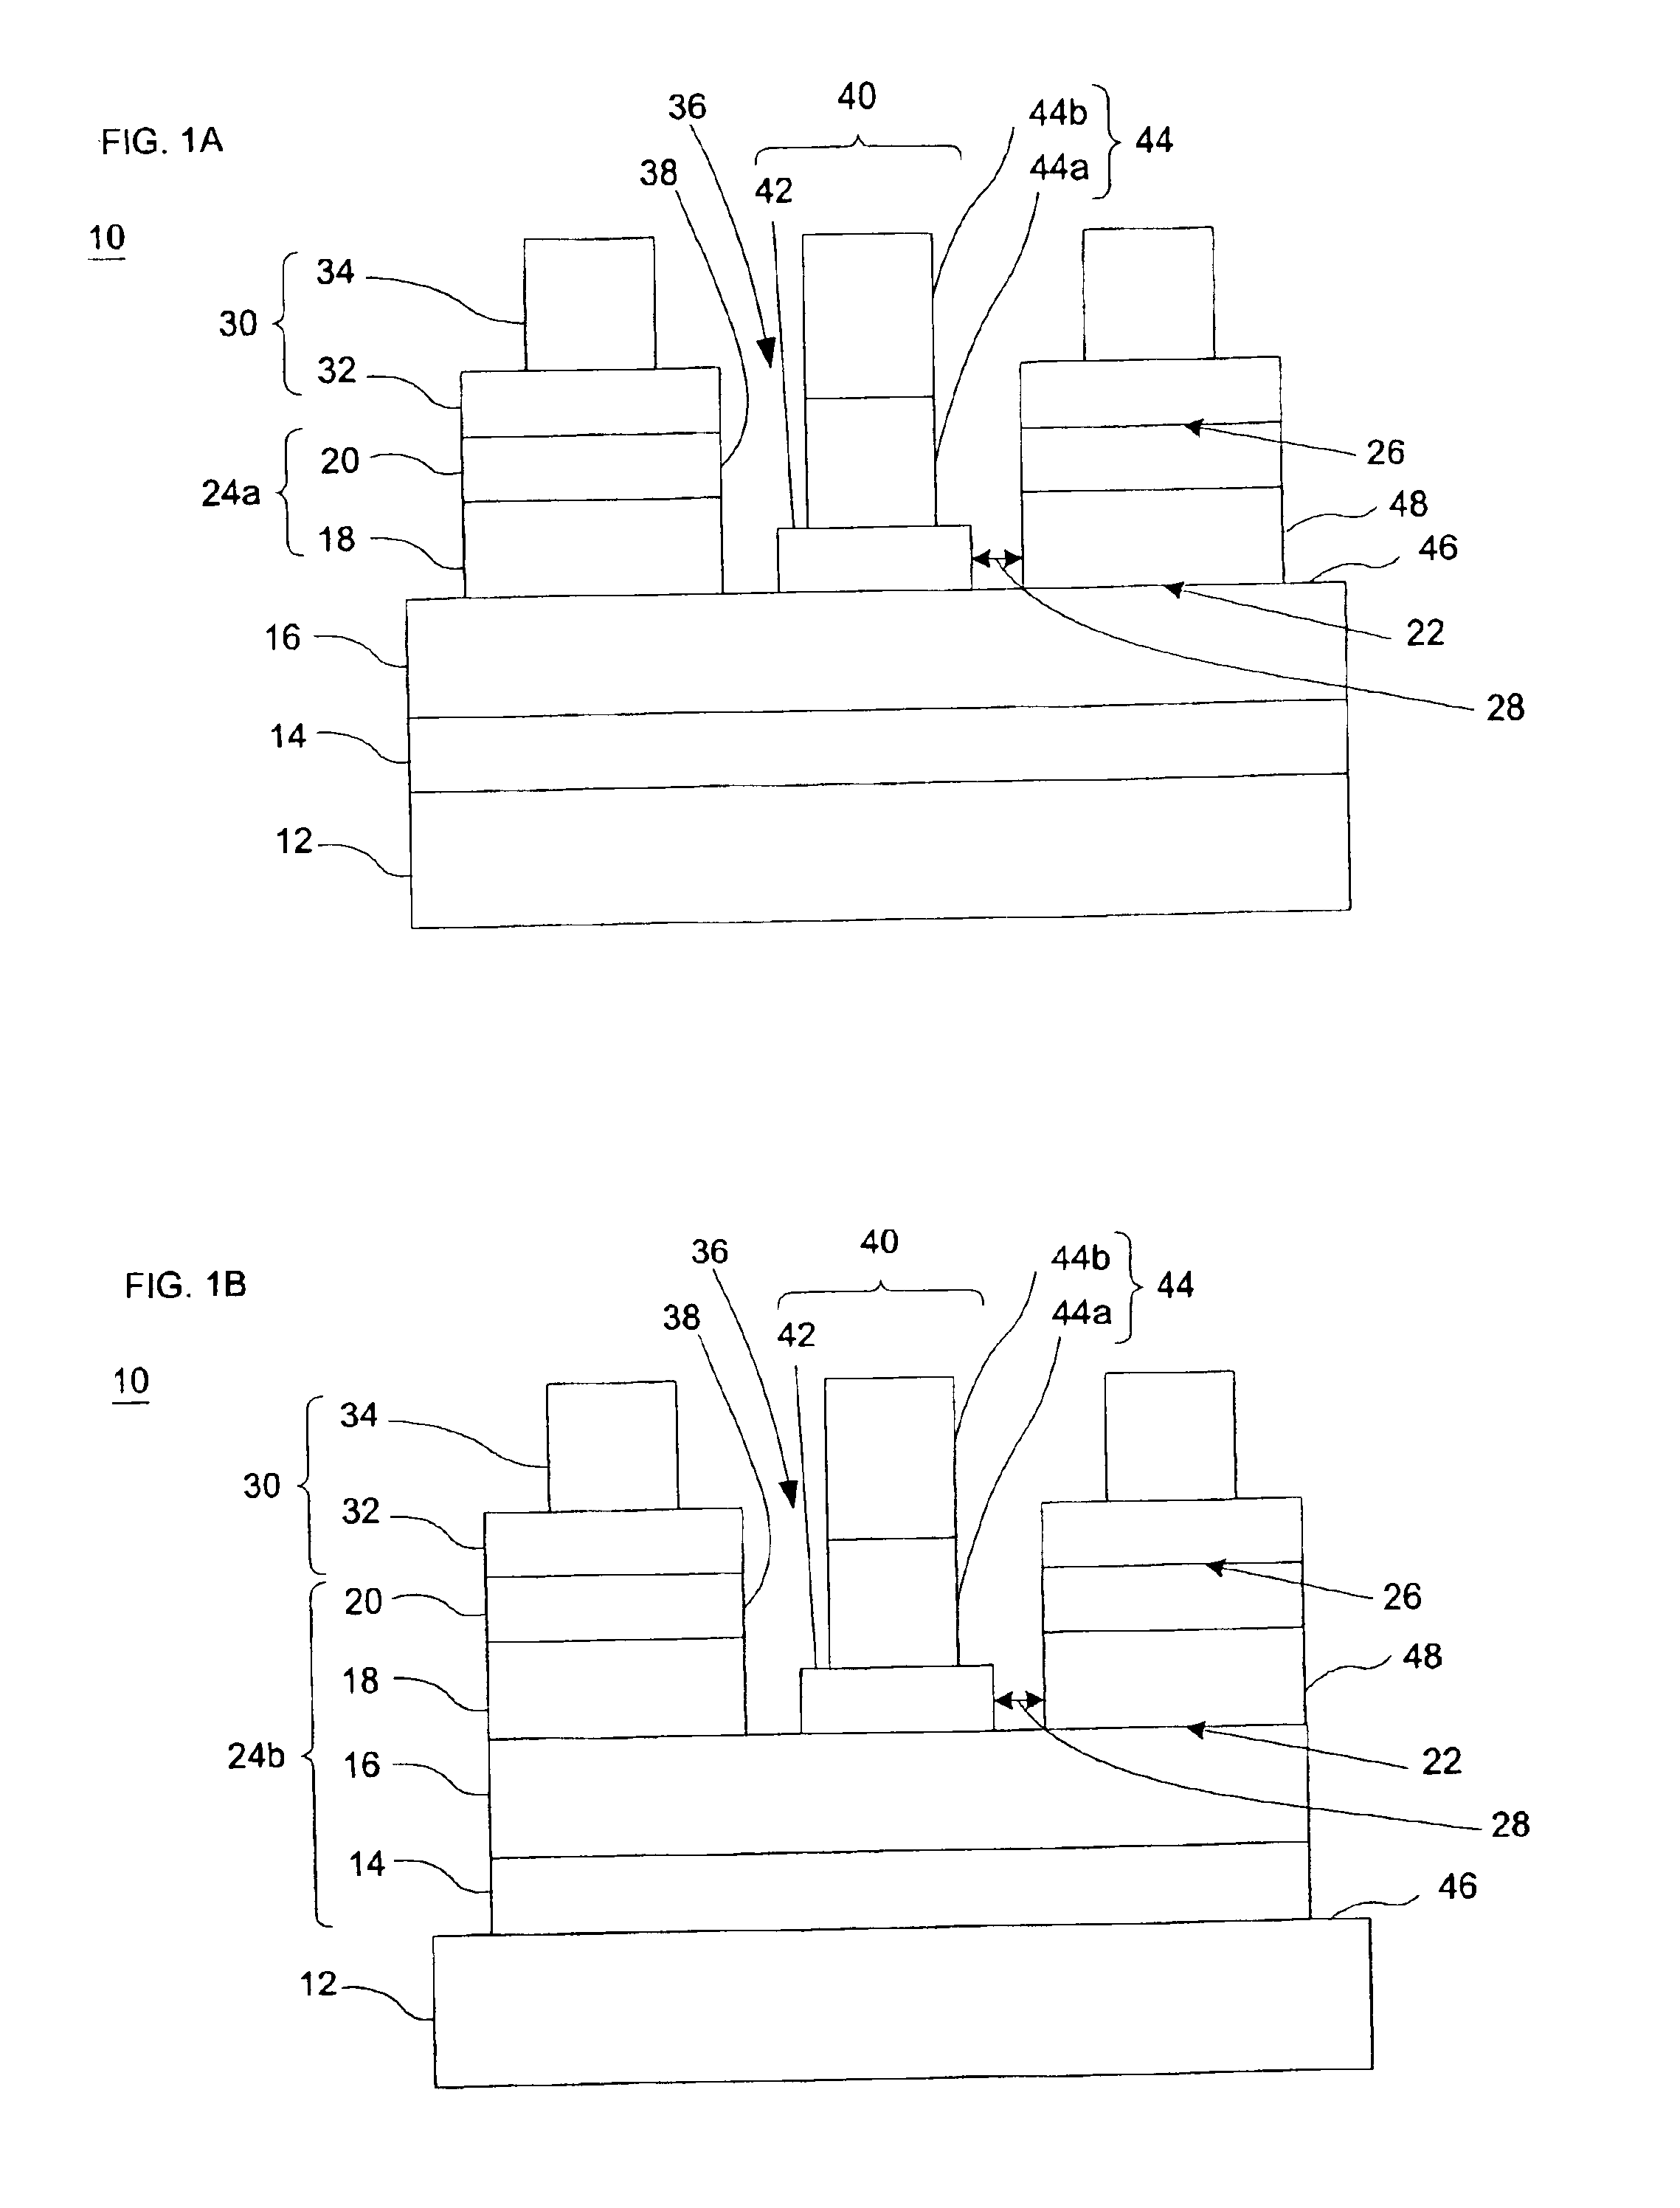 Optimized contact design for flip-chip LED